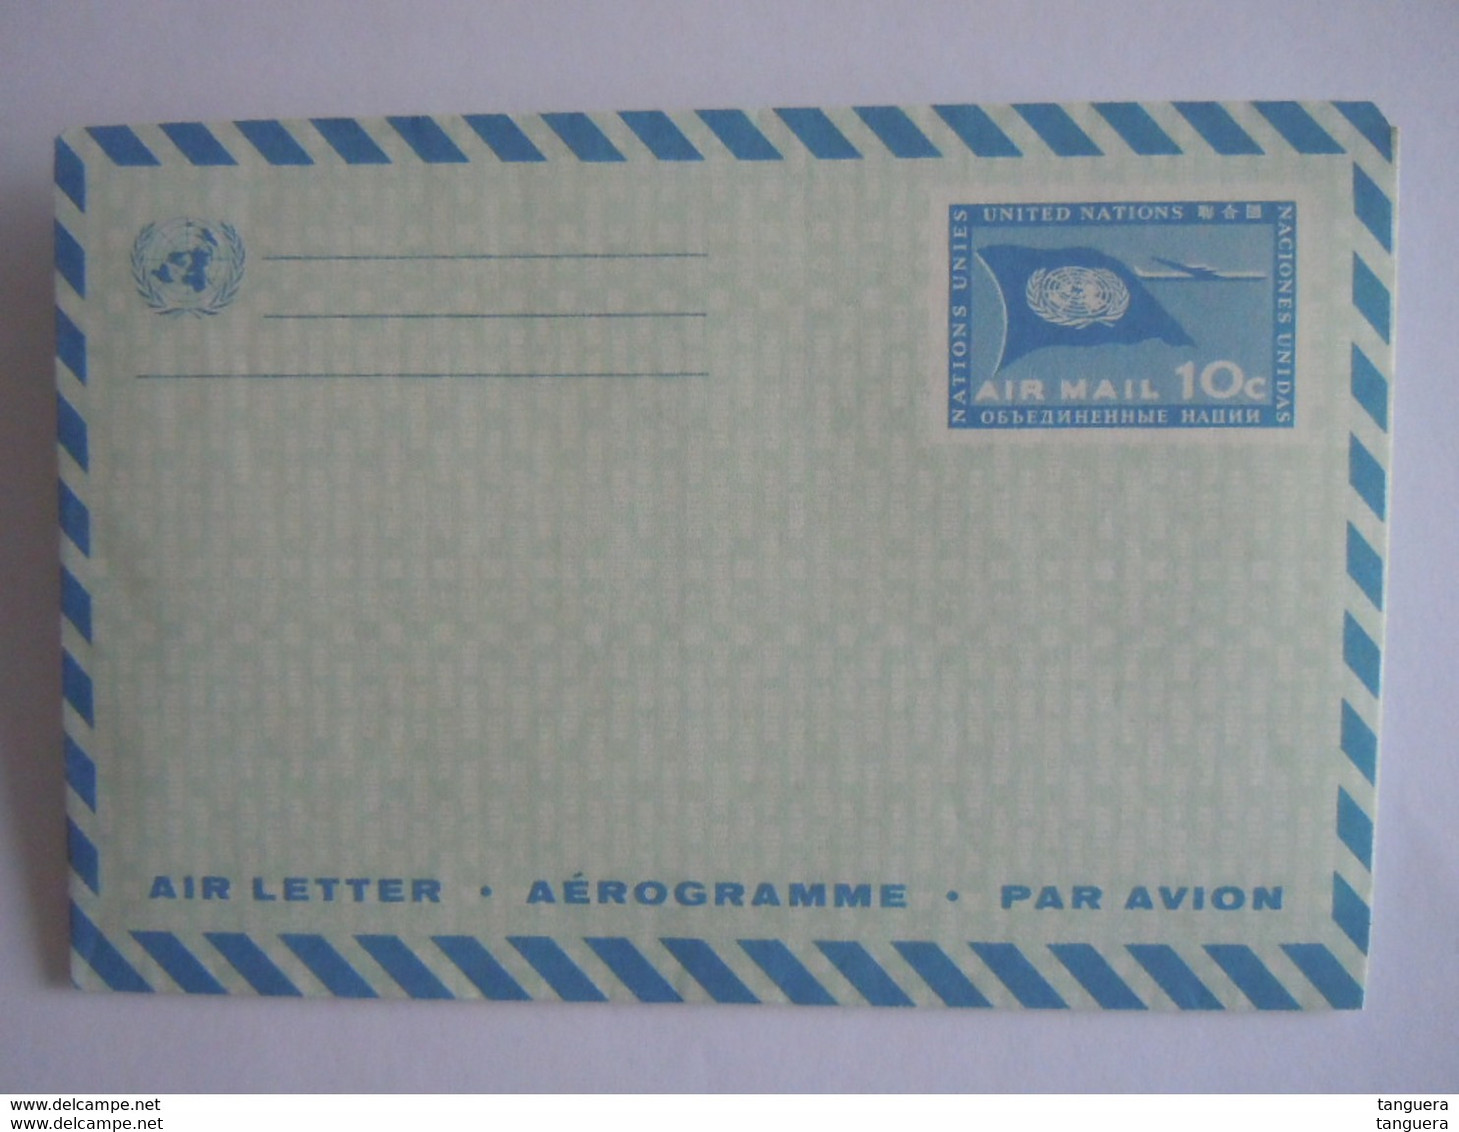 UN UNO United Nations New York Aerogramme Stationery Entier Postal Air Letter Flag 10c Mint - Posta Aerea